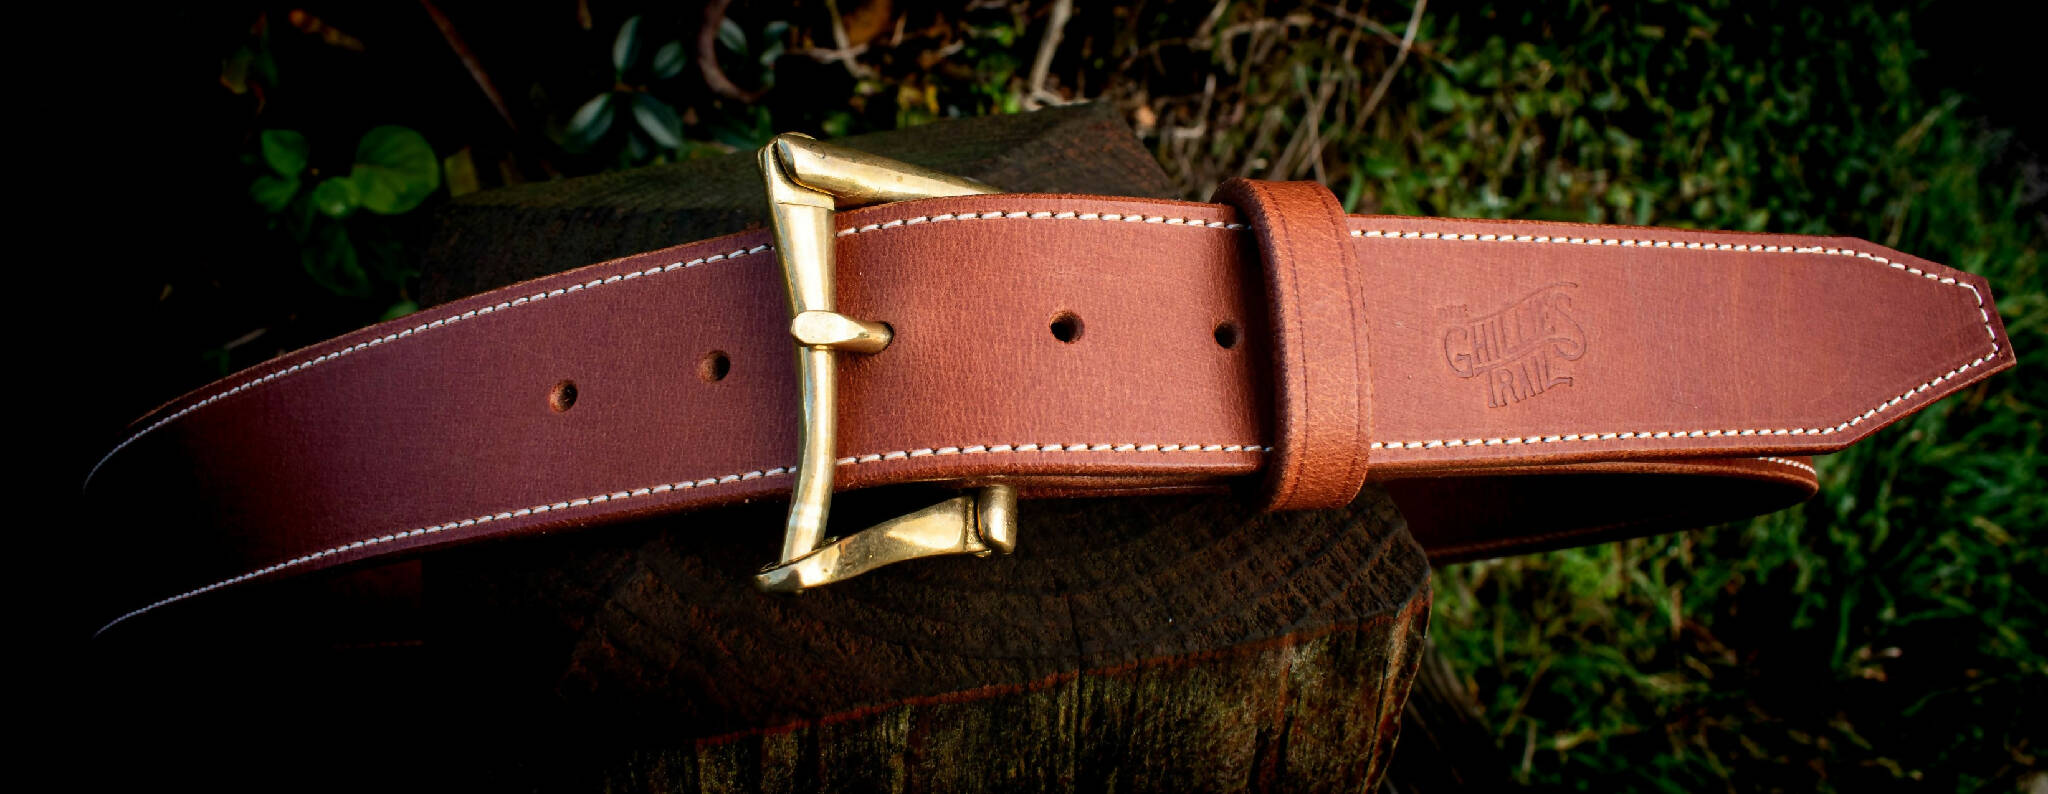 Leather belt with New York fireman's buckle